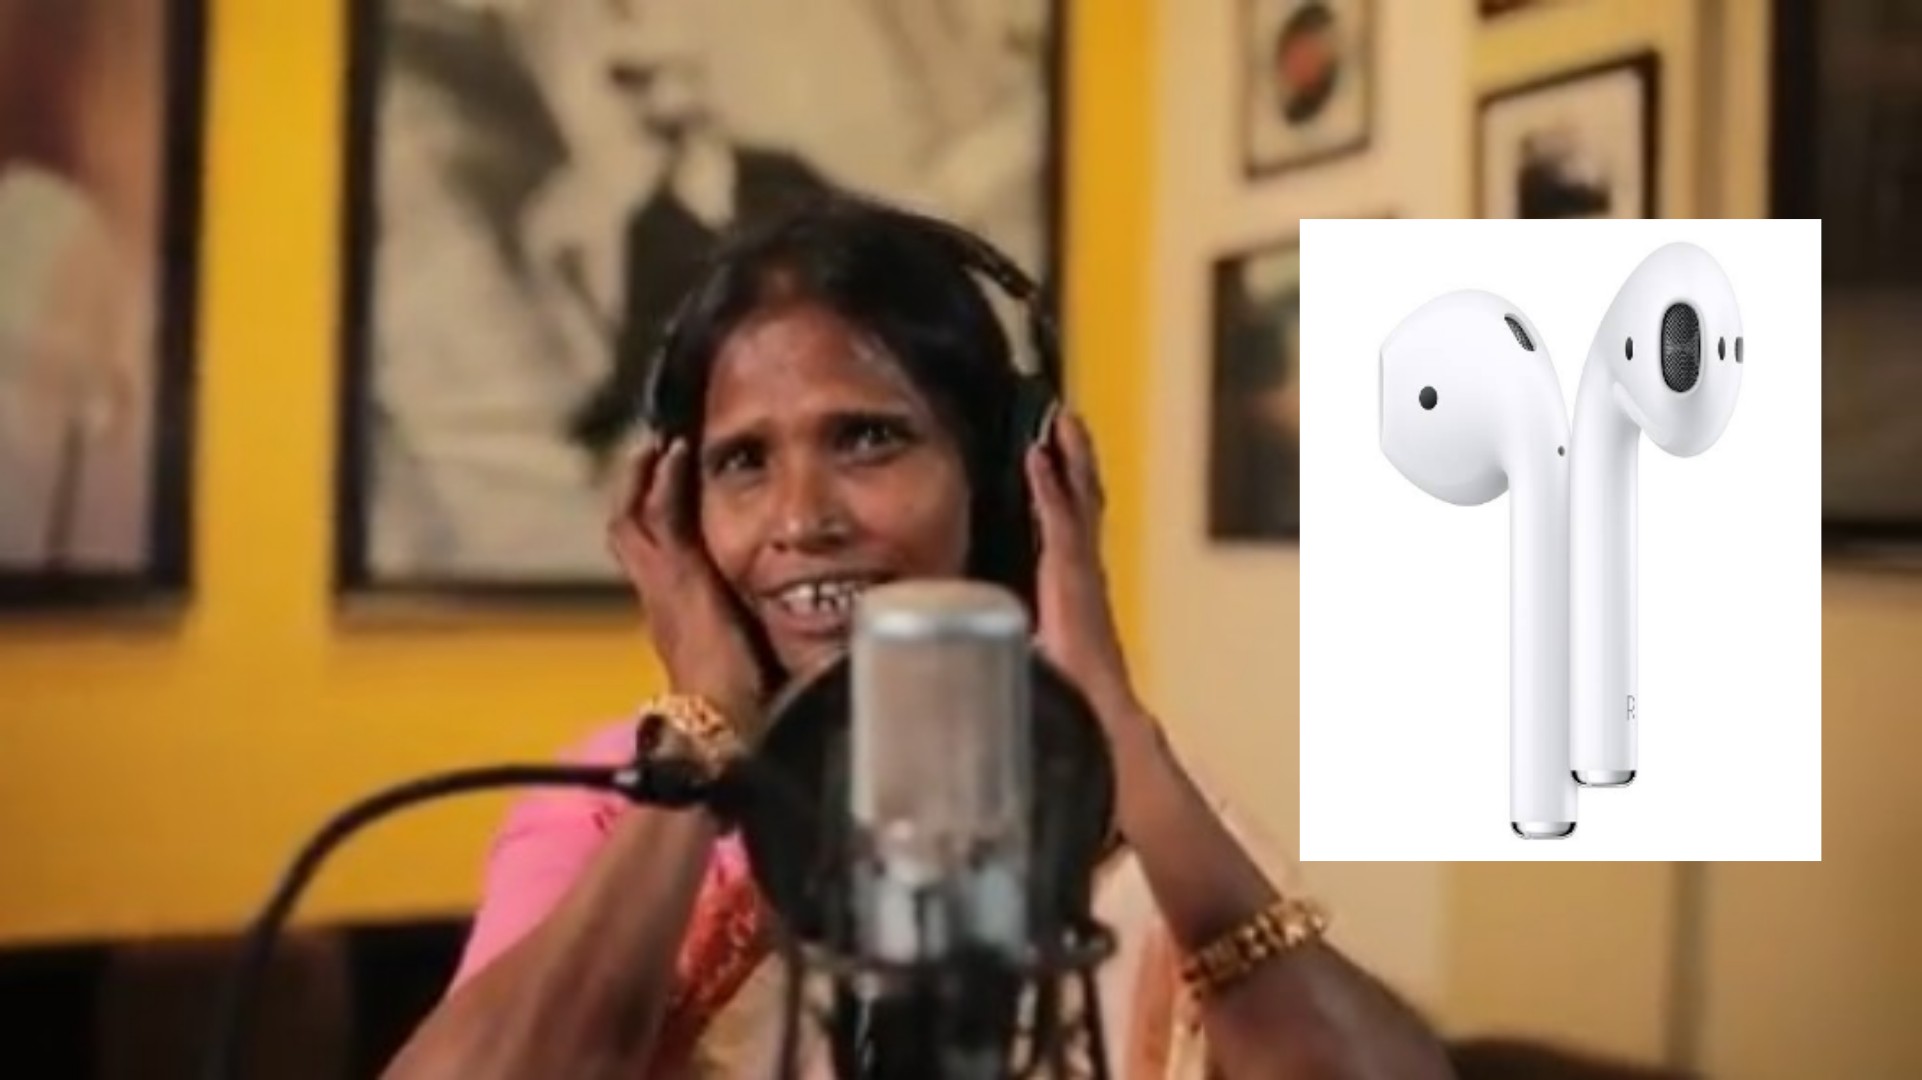 Ranu Mondal's Songs Not Audible in the Apple's AirPods Pro With Noise Cancellation